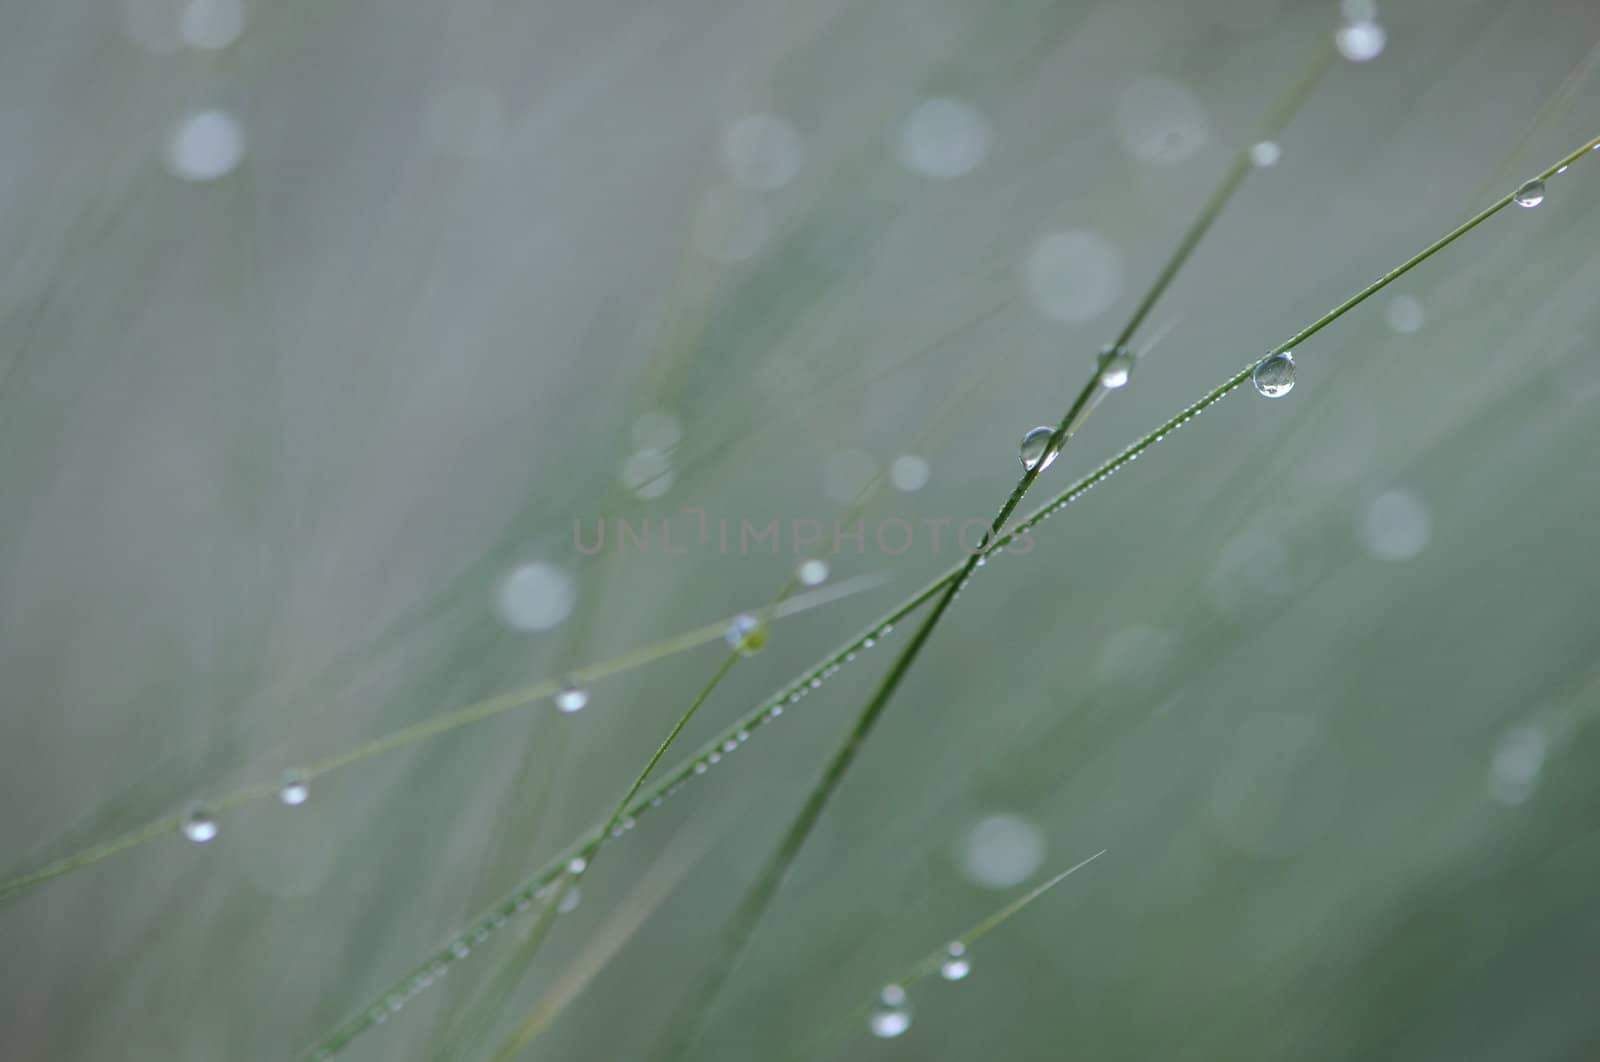 Many Water Drops on Grass by shkyo30